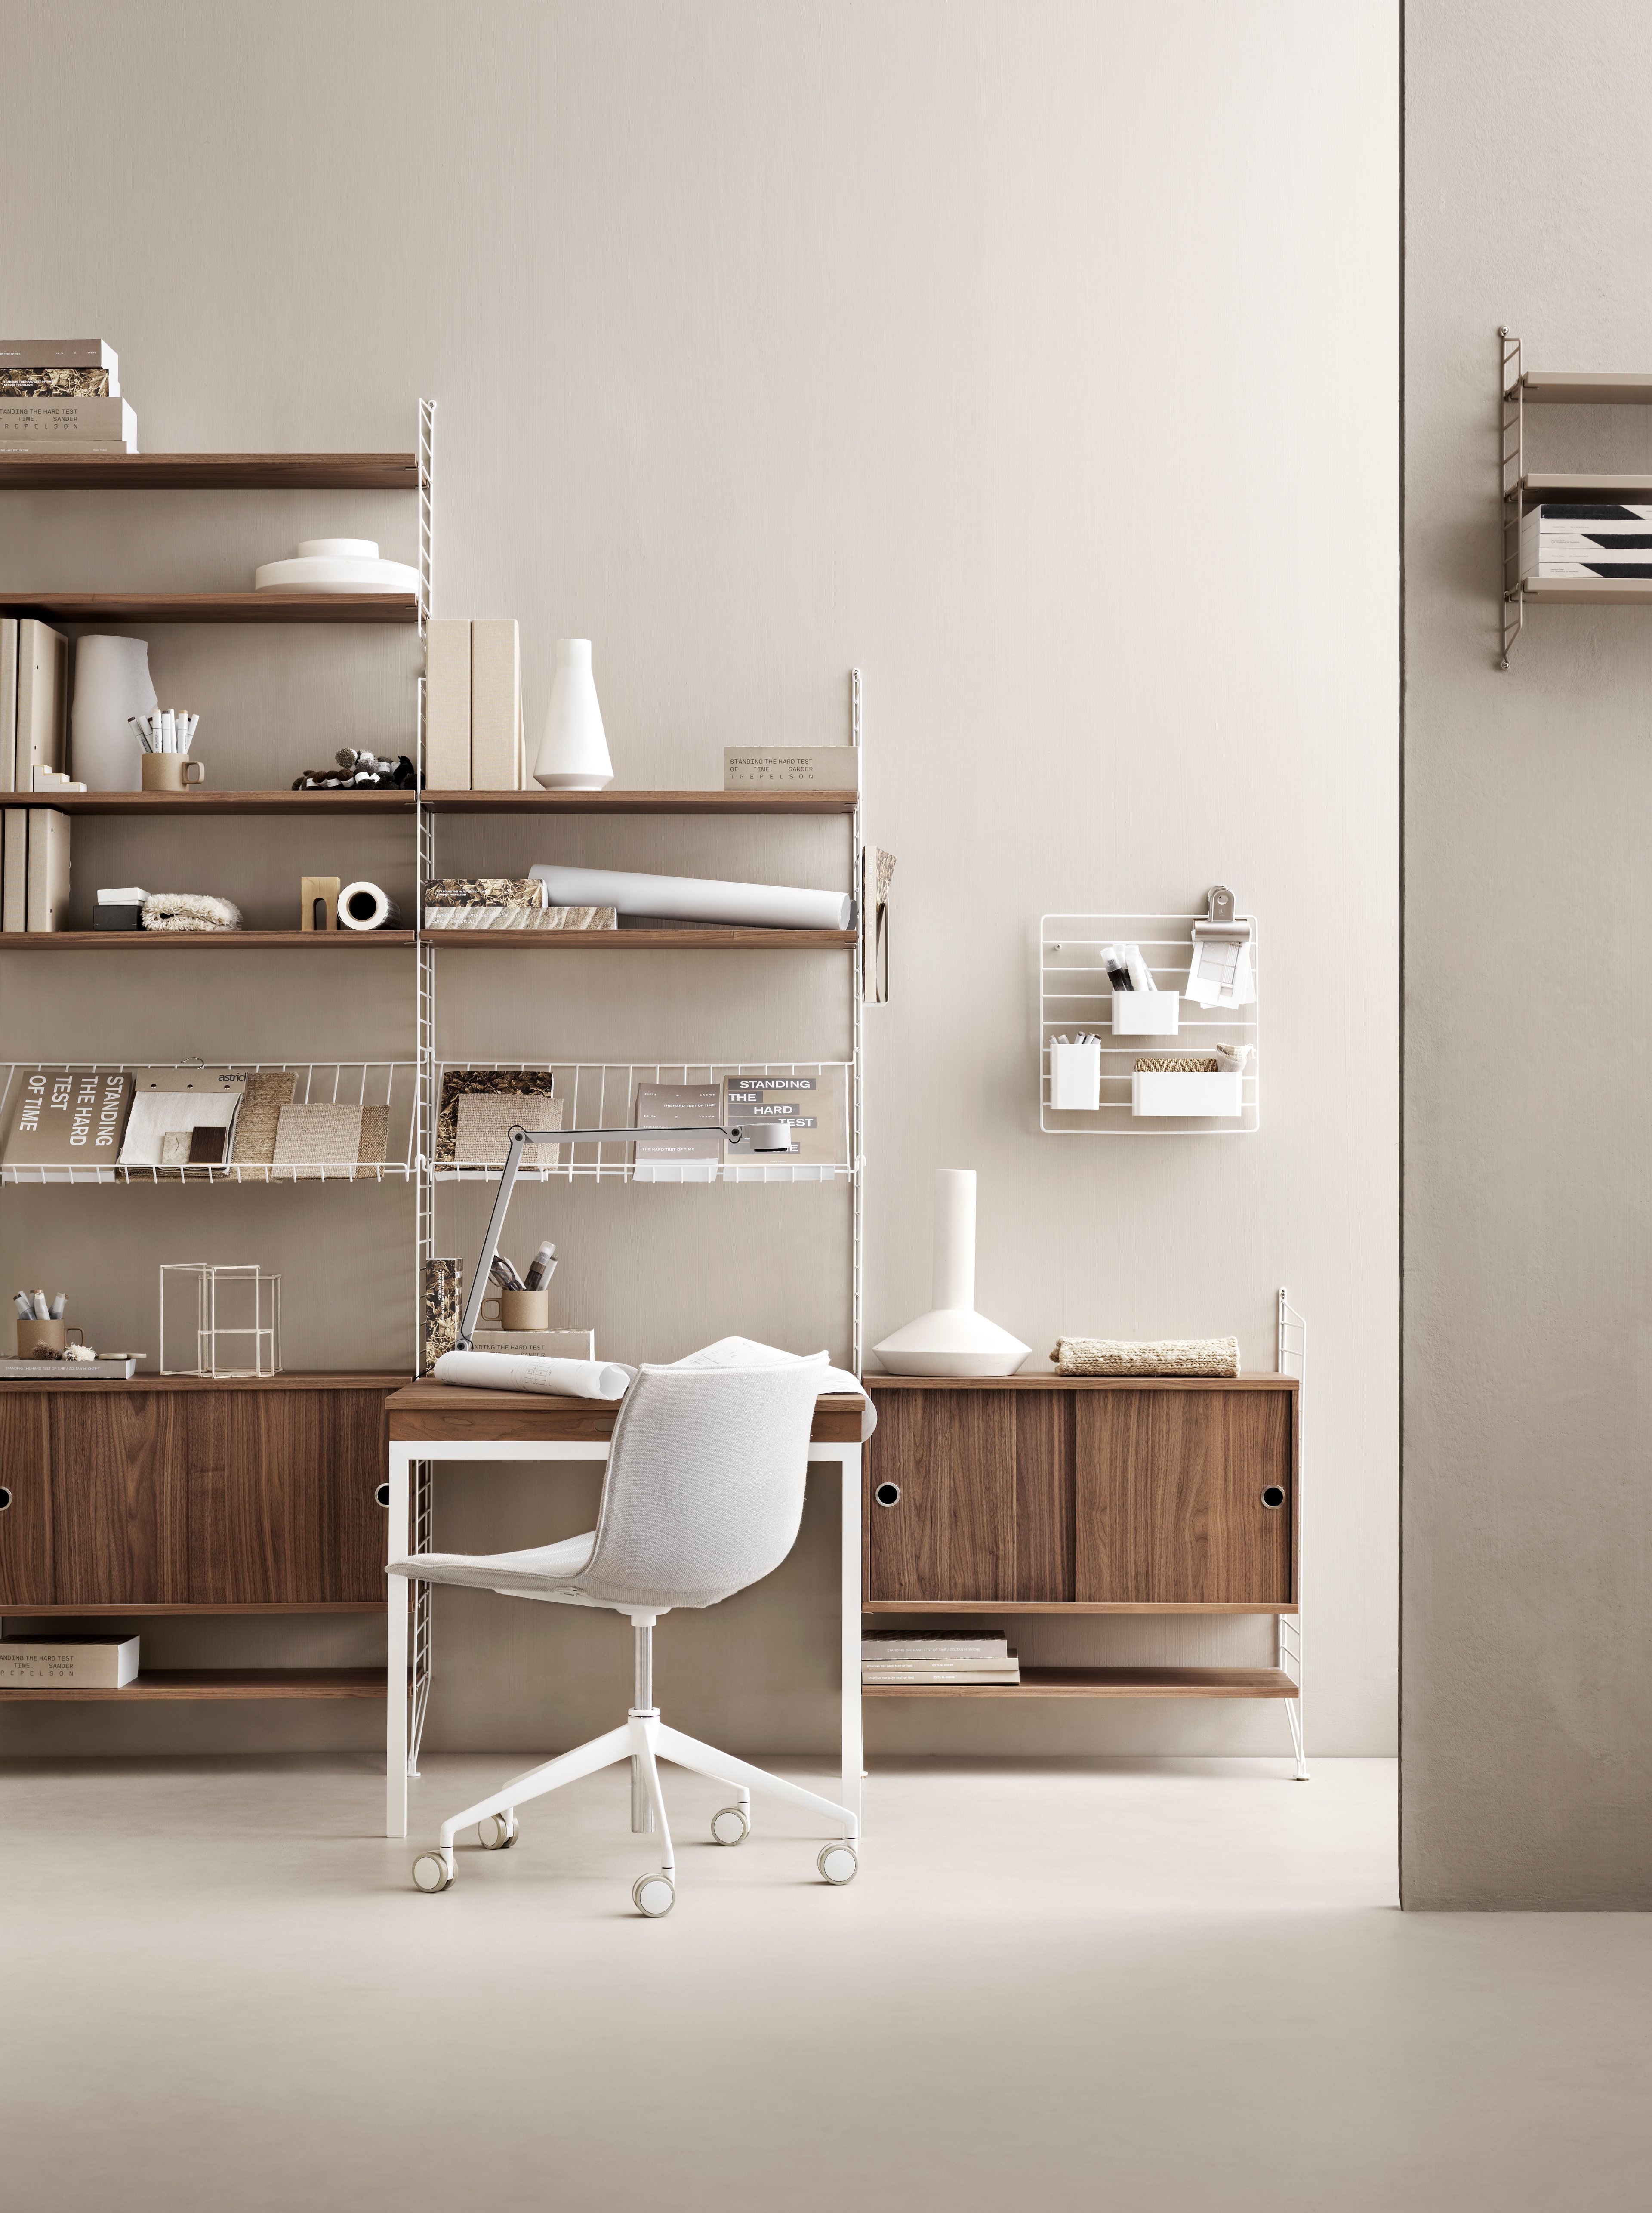 Floor panels in white. Shelves, cabinet with sliding doors and folding table in walnut. Grid for wall, magazine holder and organizers in white.